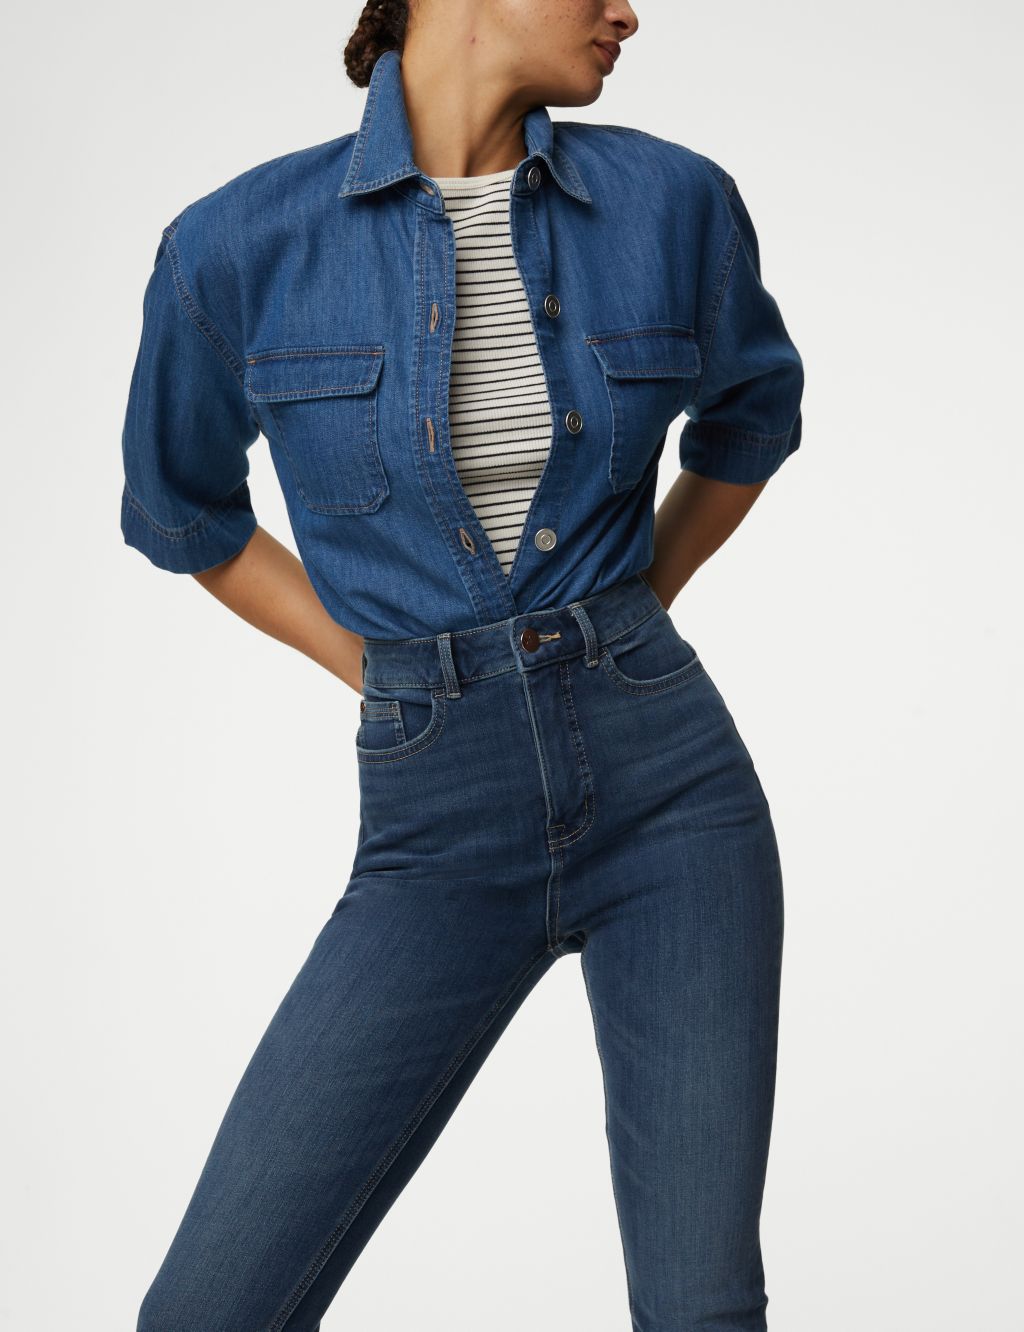 Magic Shaping High Waisted Skinny Jeans image 1